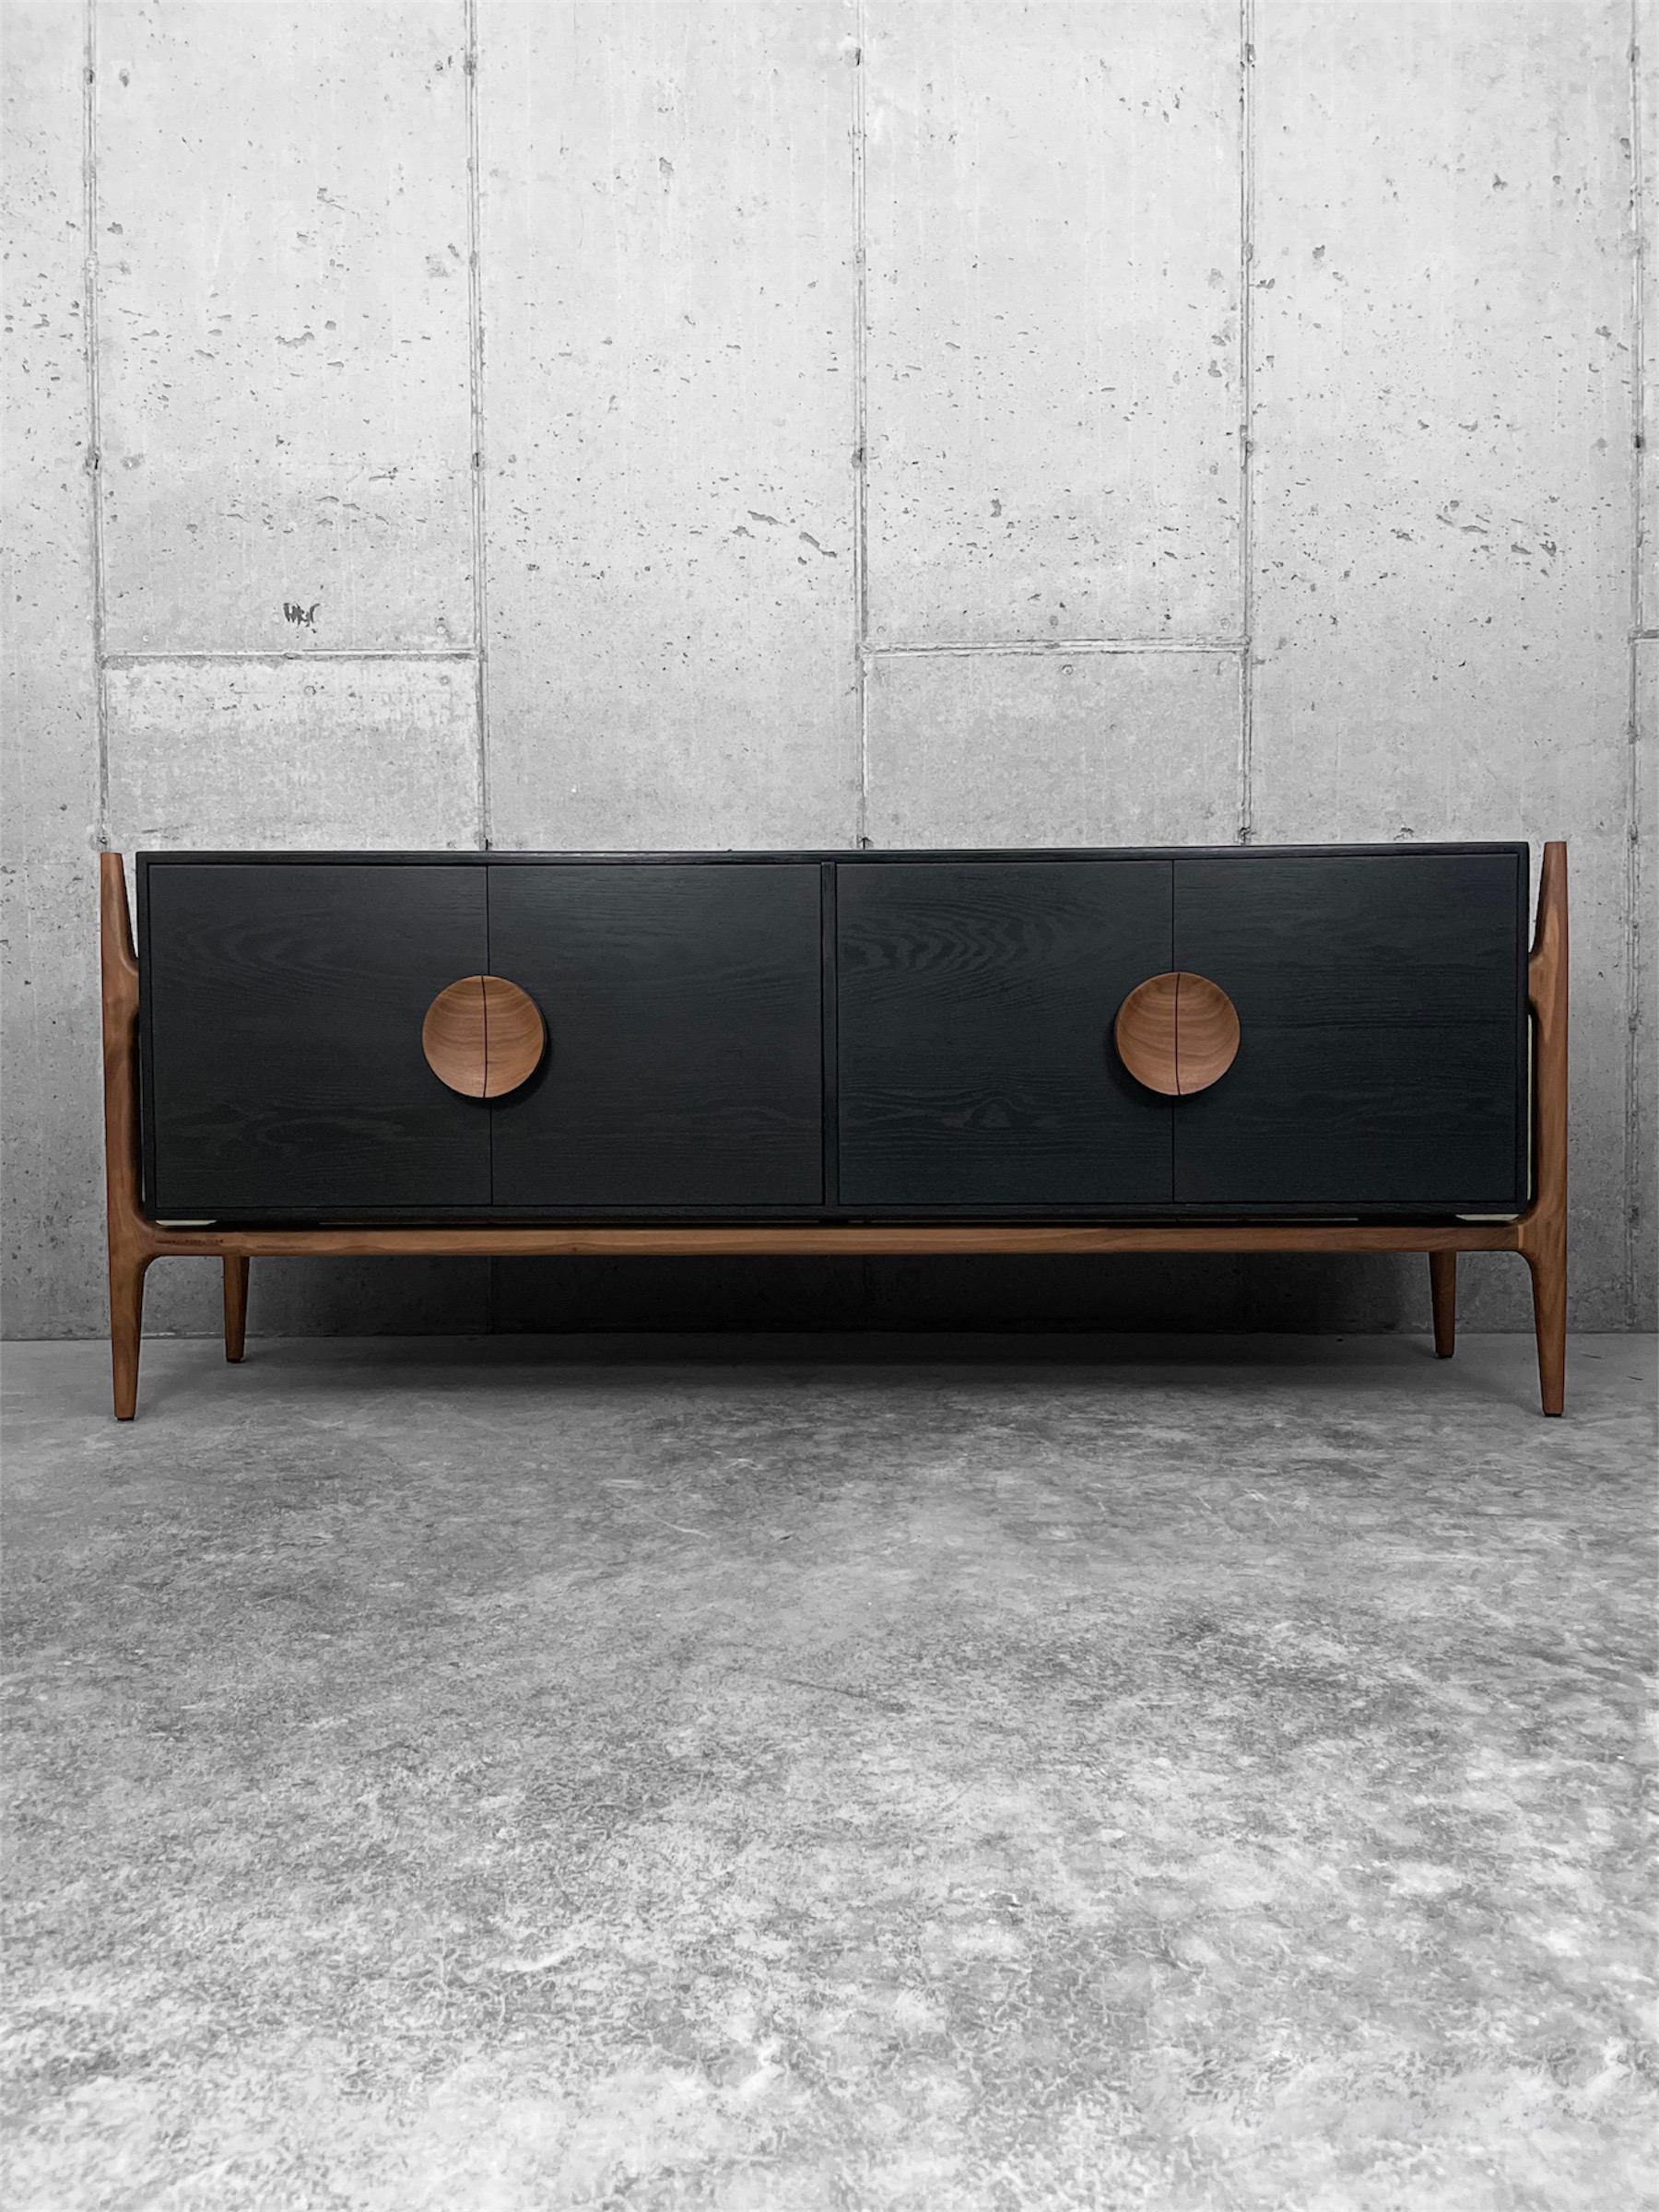 Sideboard No.1 is a highly detailed and functional cabinet featuring traditional joinery that has been lost in today’s fast built, throw away furniture. Although there have been multiple made, no two are the same and are unique in their own way.